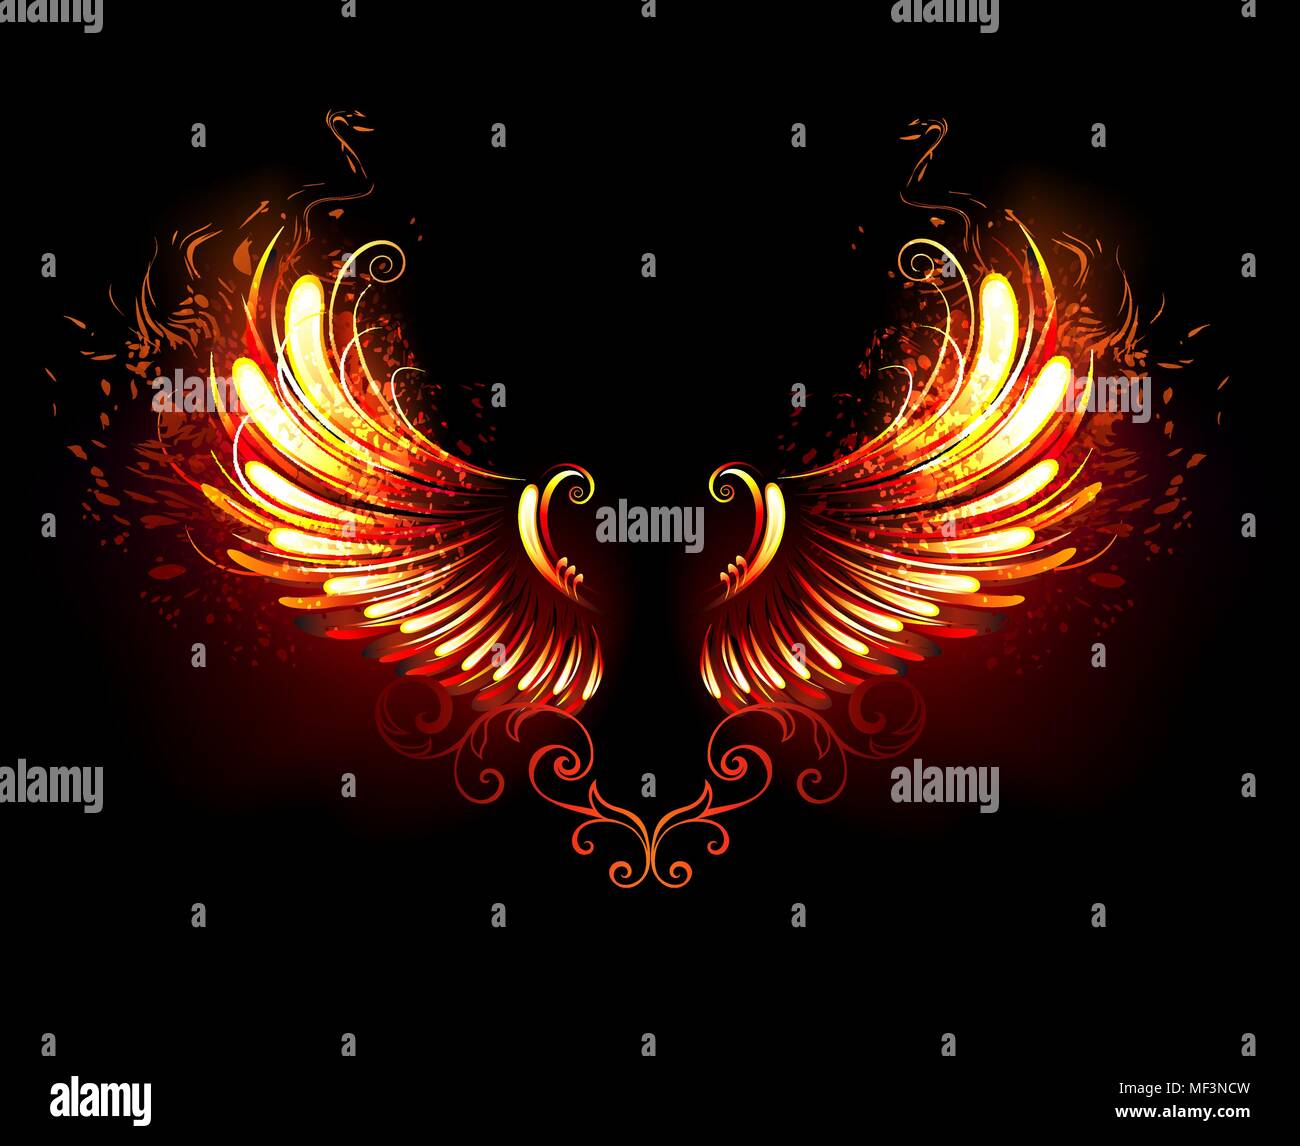 Wings of fire and flame on black background. Stock Vector